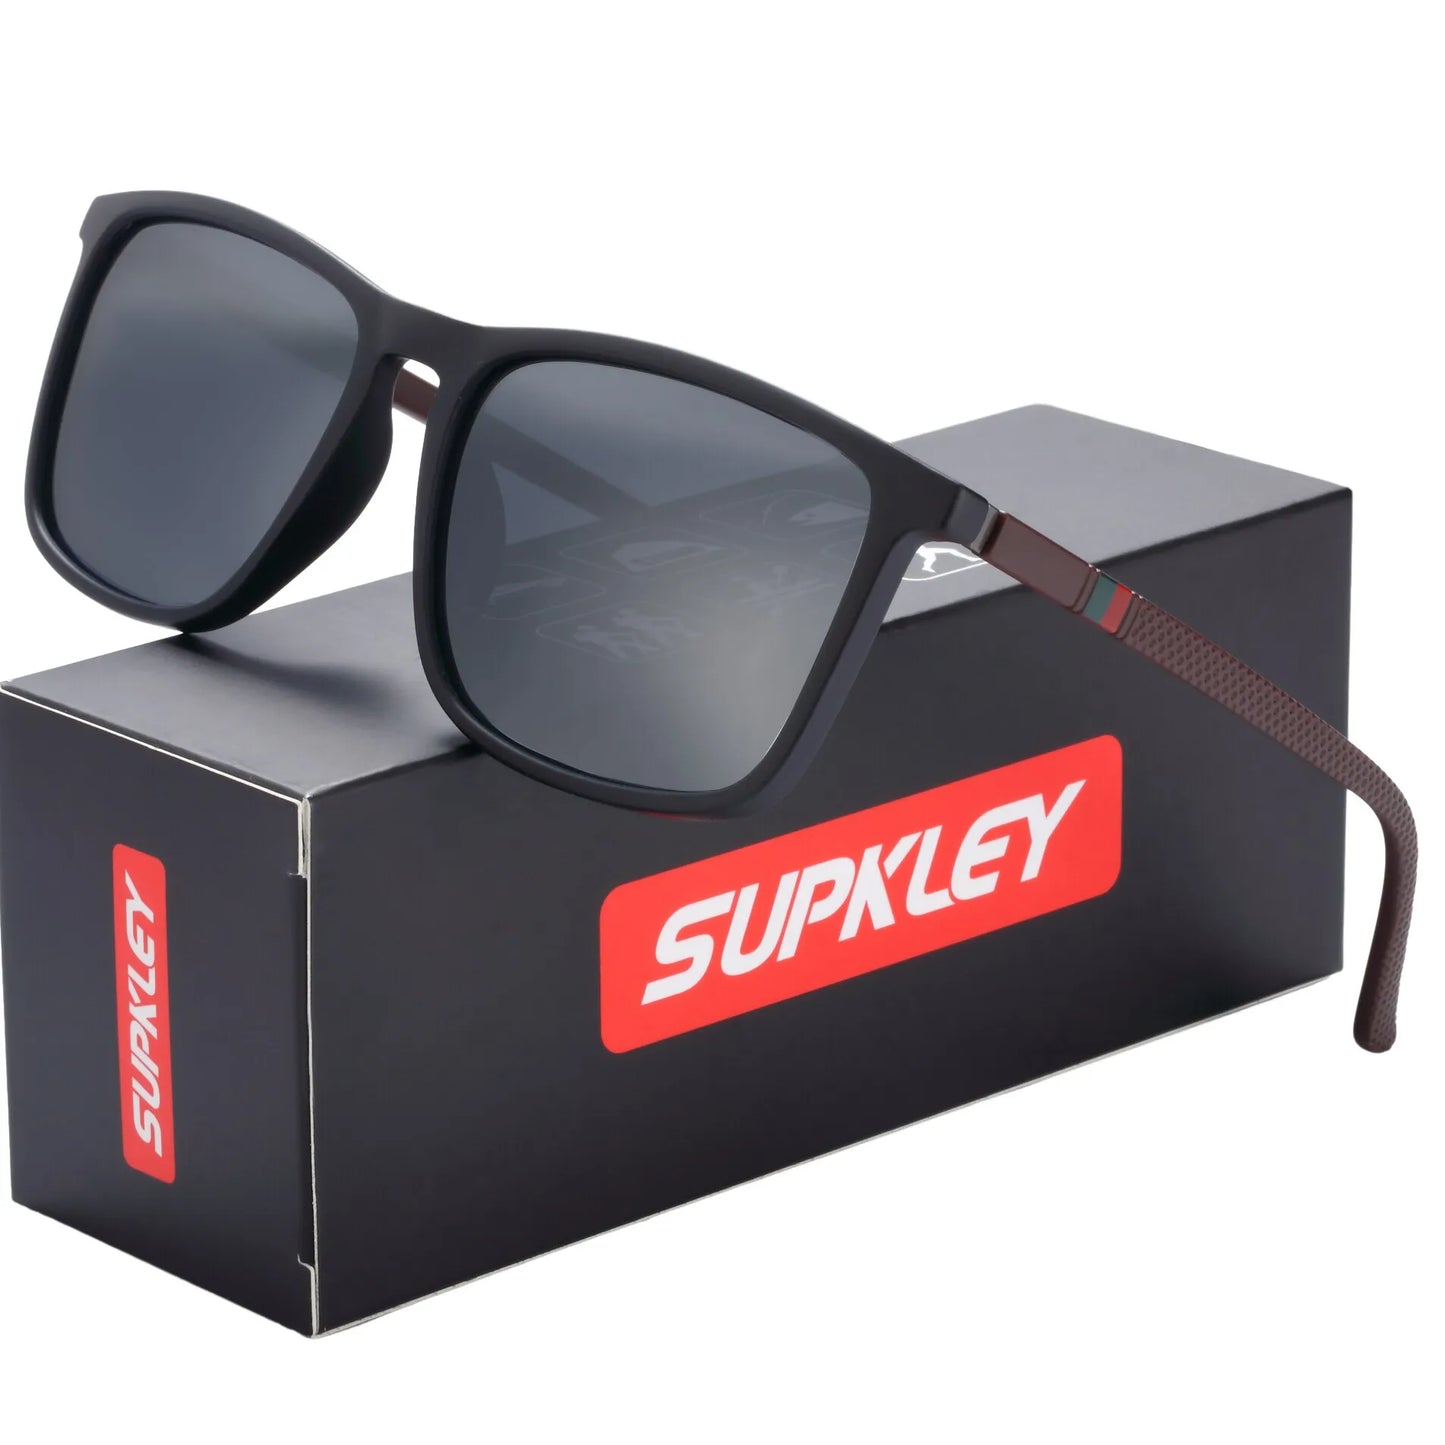 SUPKLEY Sports Sunglasses for Men Polarized Comfortable Wear Square Sun Glasses Male Light Weight Eyewear Accessory with Origina